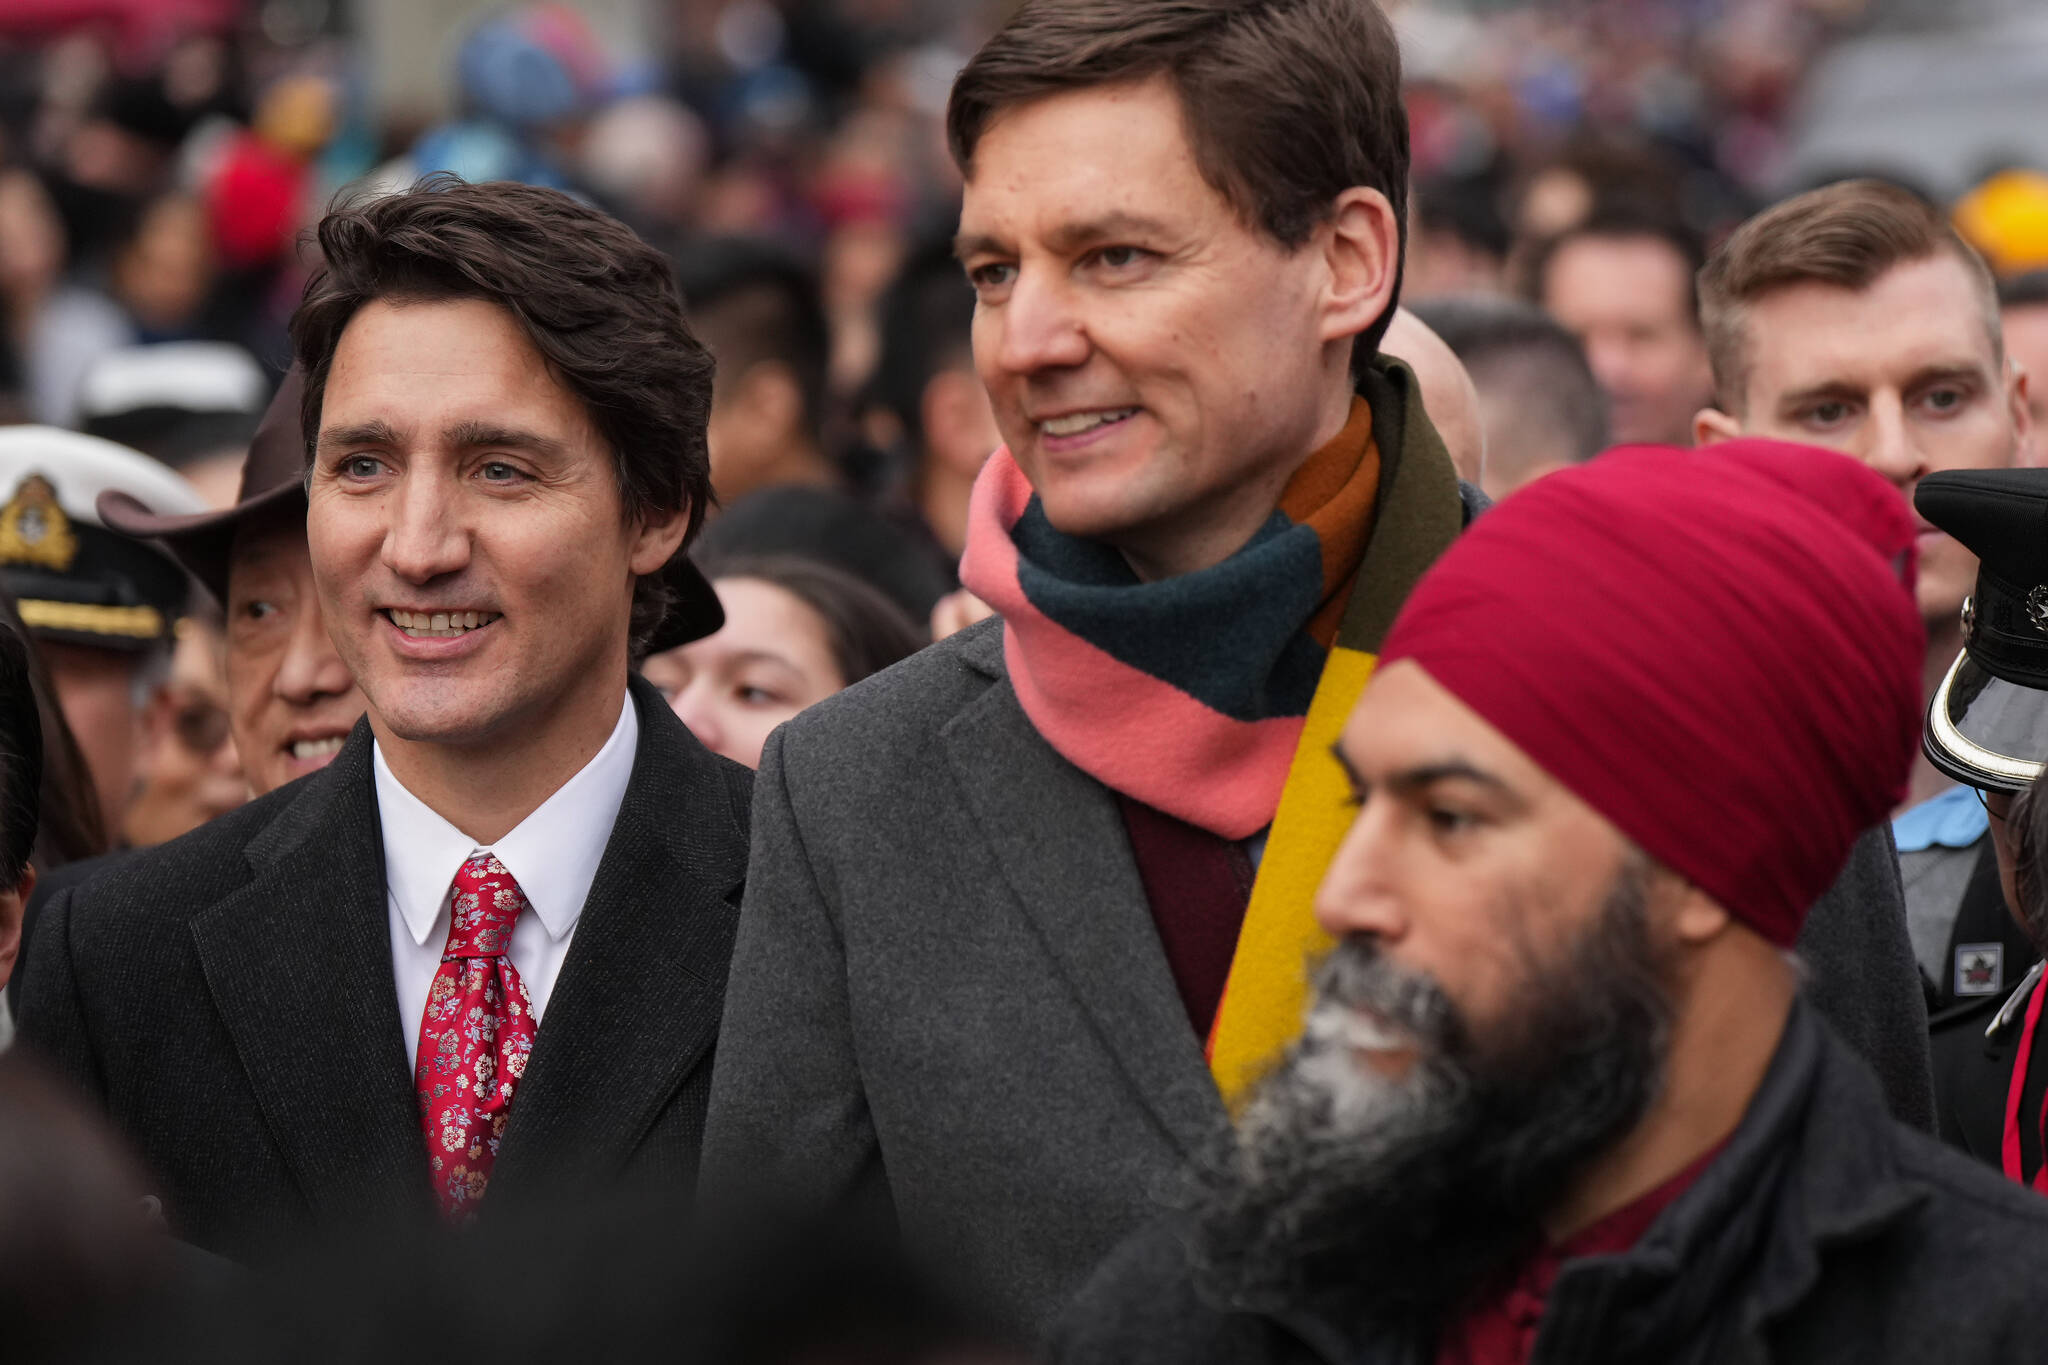 Prime Minister Justin Trudeau, from left to right, B.C. Premier David Eby and NDP leader Jagmeet Singh prepare to march in the Lunar New Year parade in Chinatown, in Vancouver, on Sunday, January 22, 2023. THE CANADIAN PRESS/Darryl Dyck